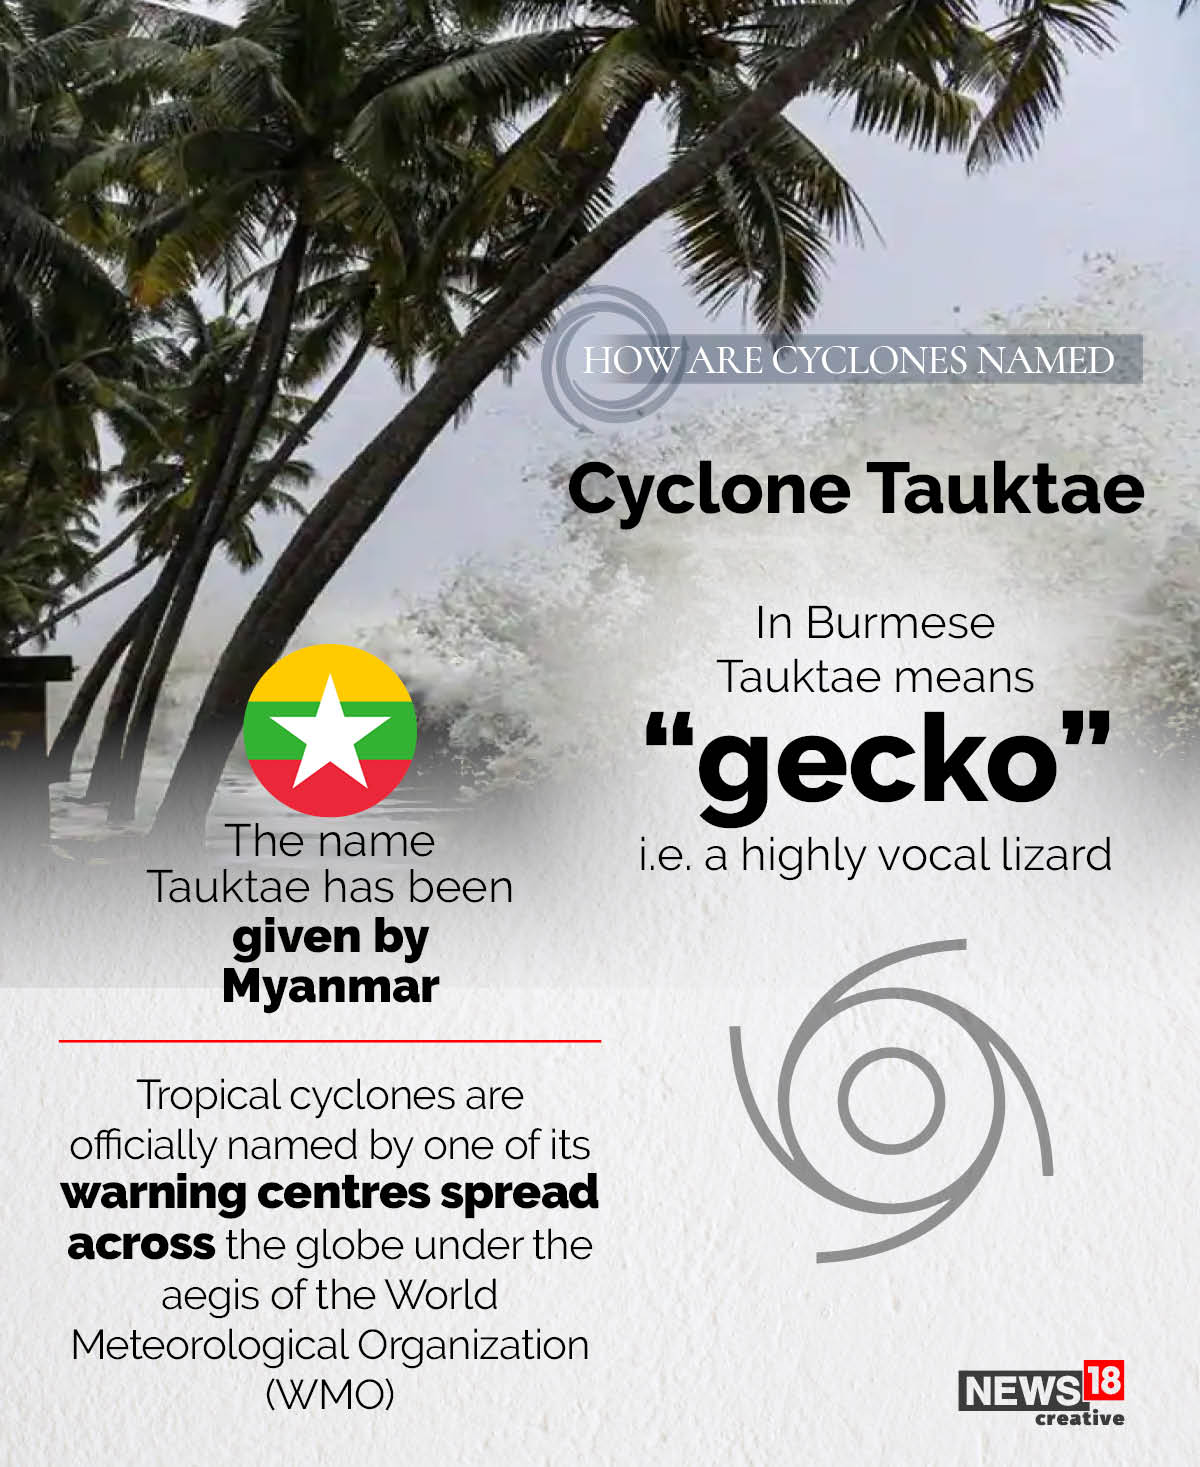 Why Tauktae? A look at how cyclones are named